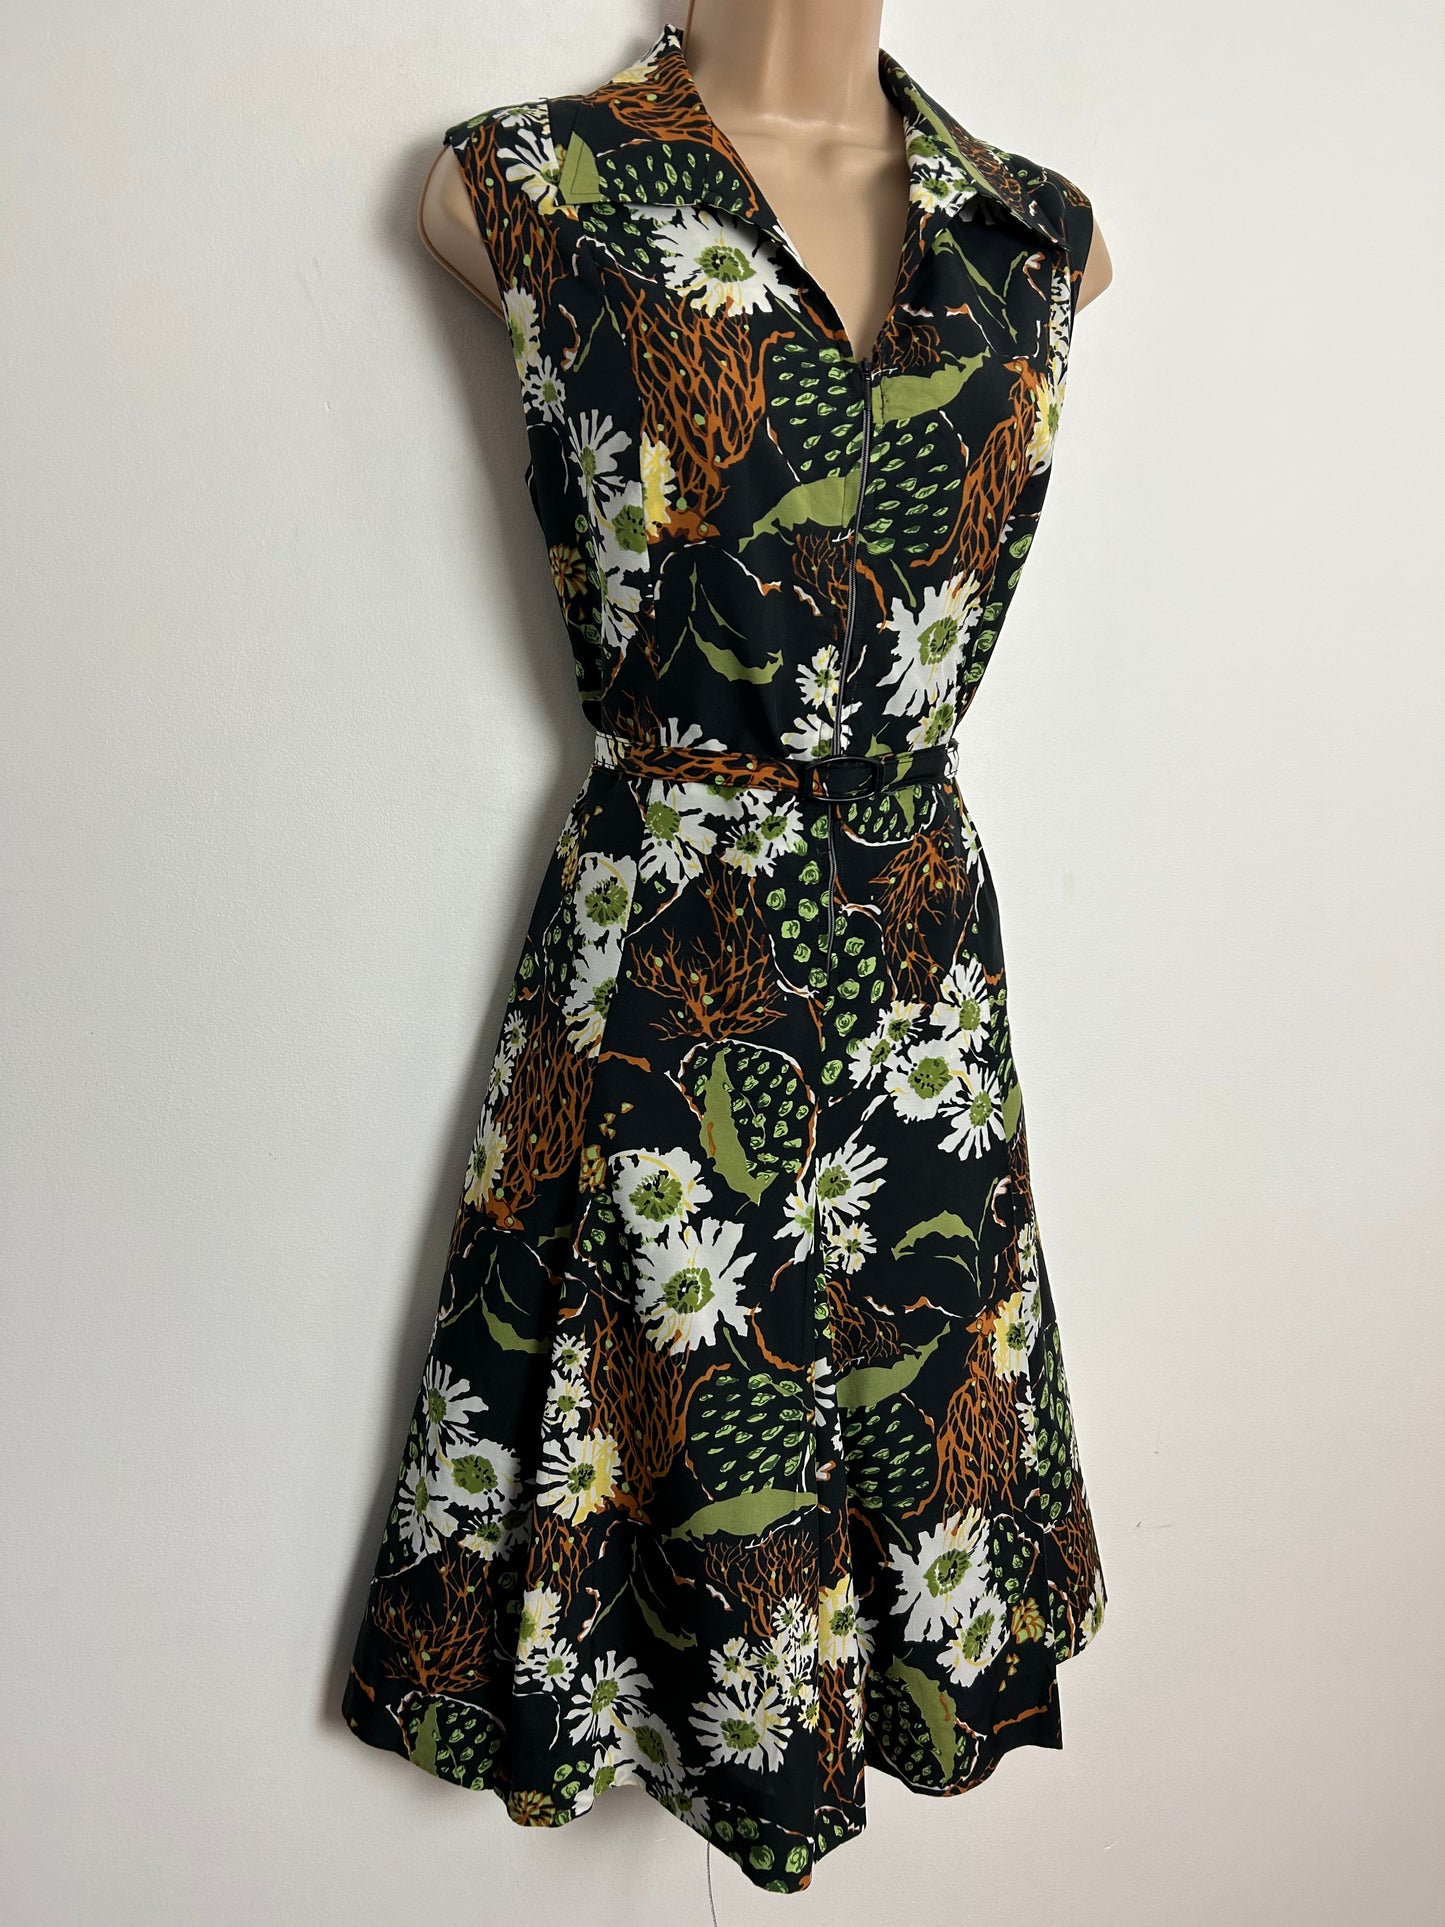 Vintage 1970s C&A UK Size 12-14 Black White Rust & Green Floral Print Belted Zip Front Fit & Flare Day Dress